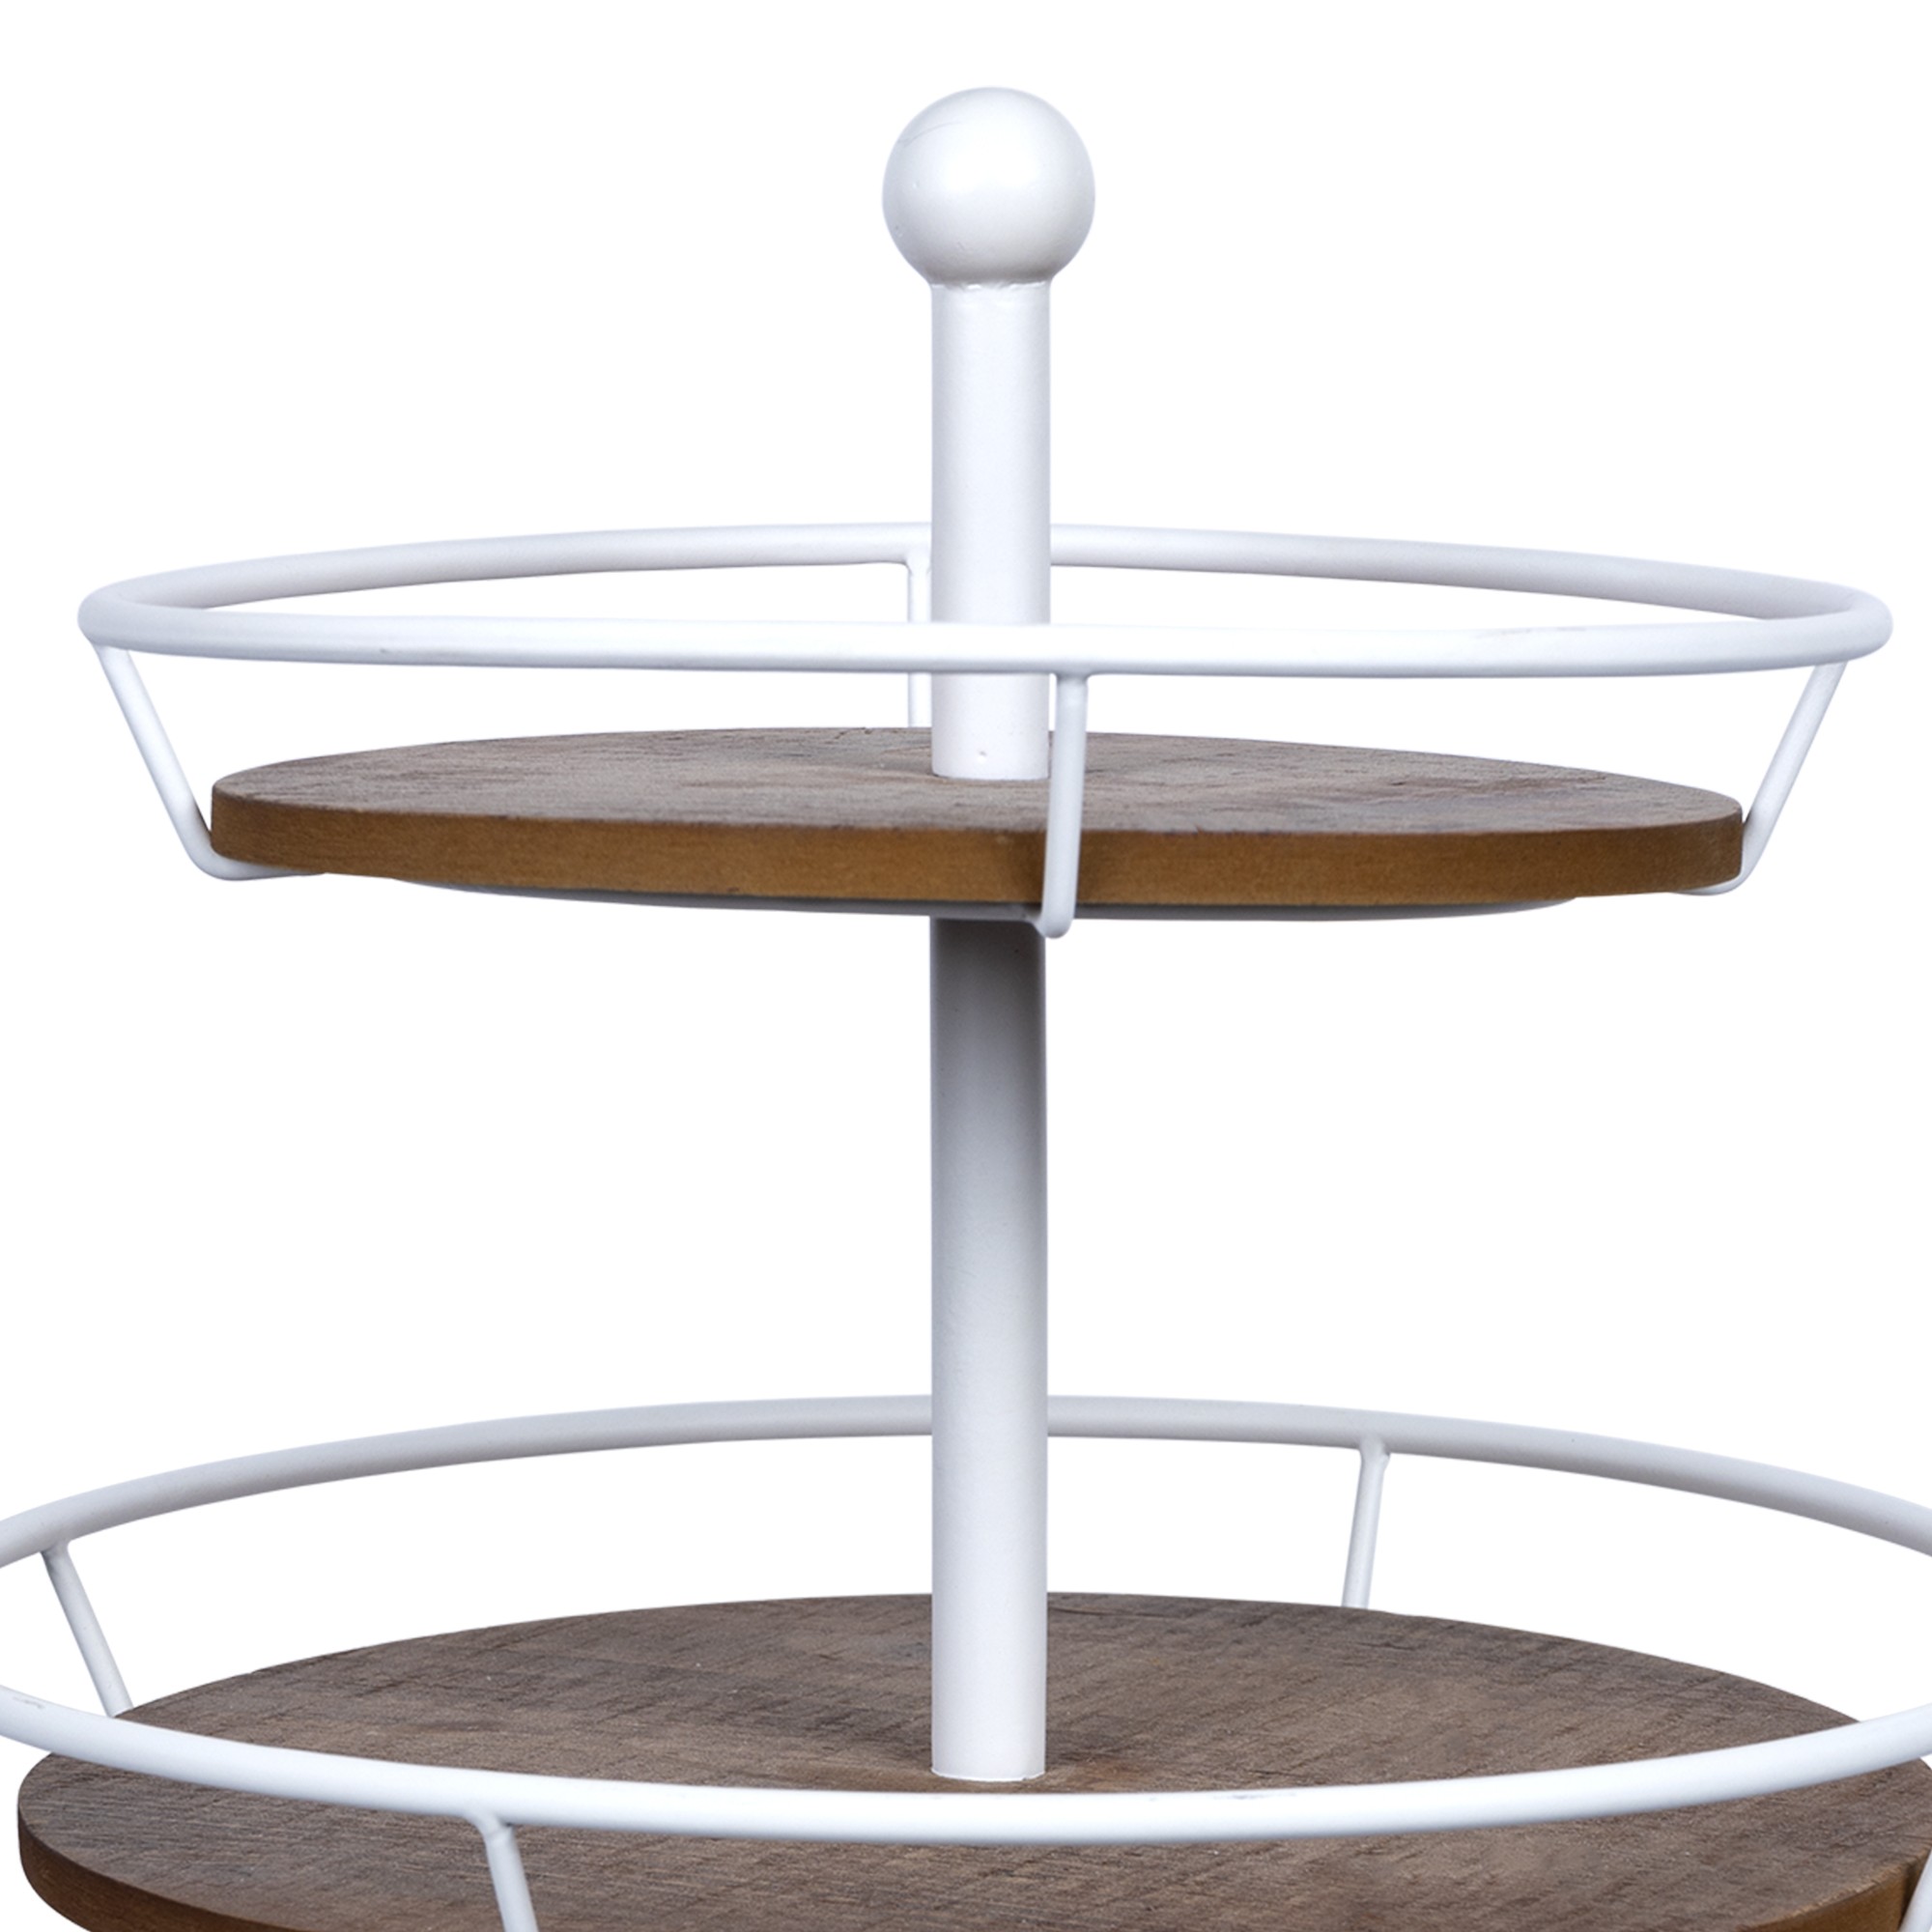 Three Tiered Metal and Wood Decorative Stand